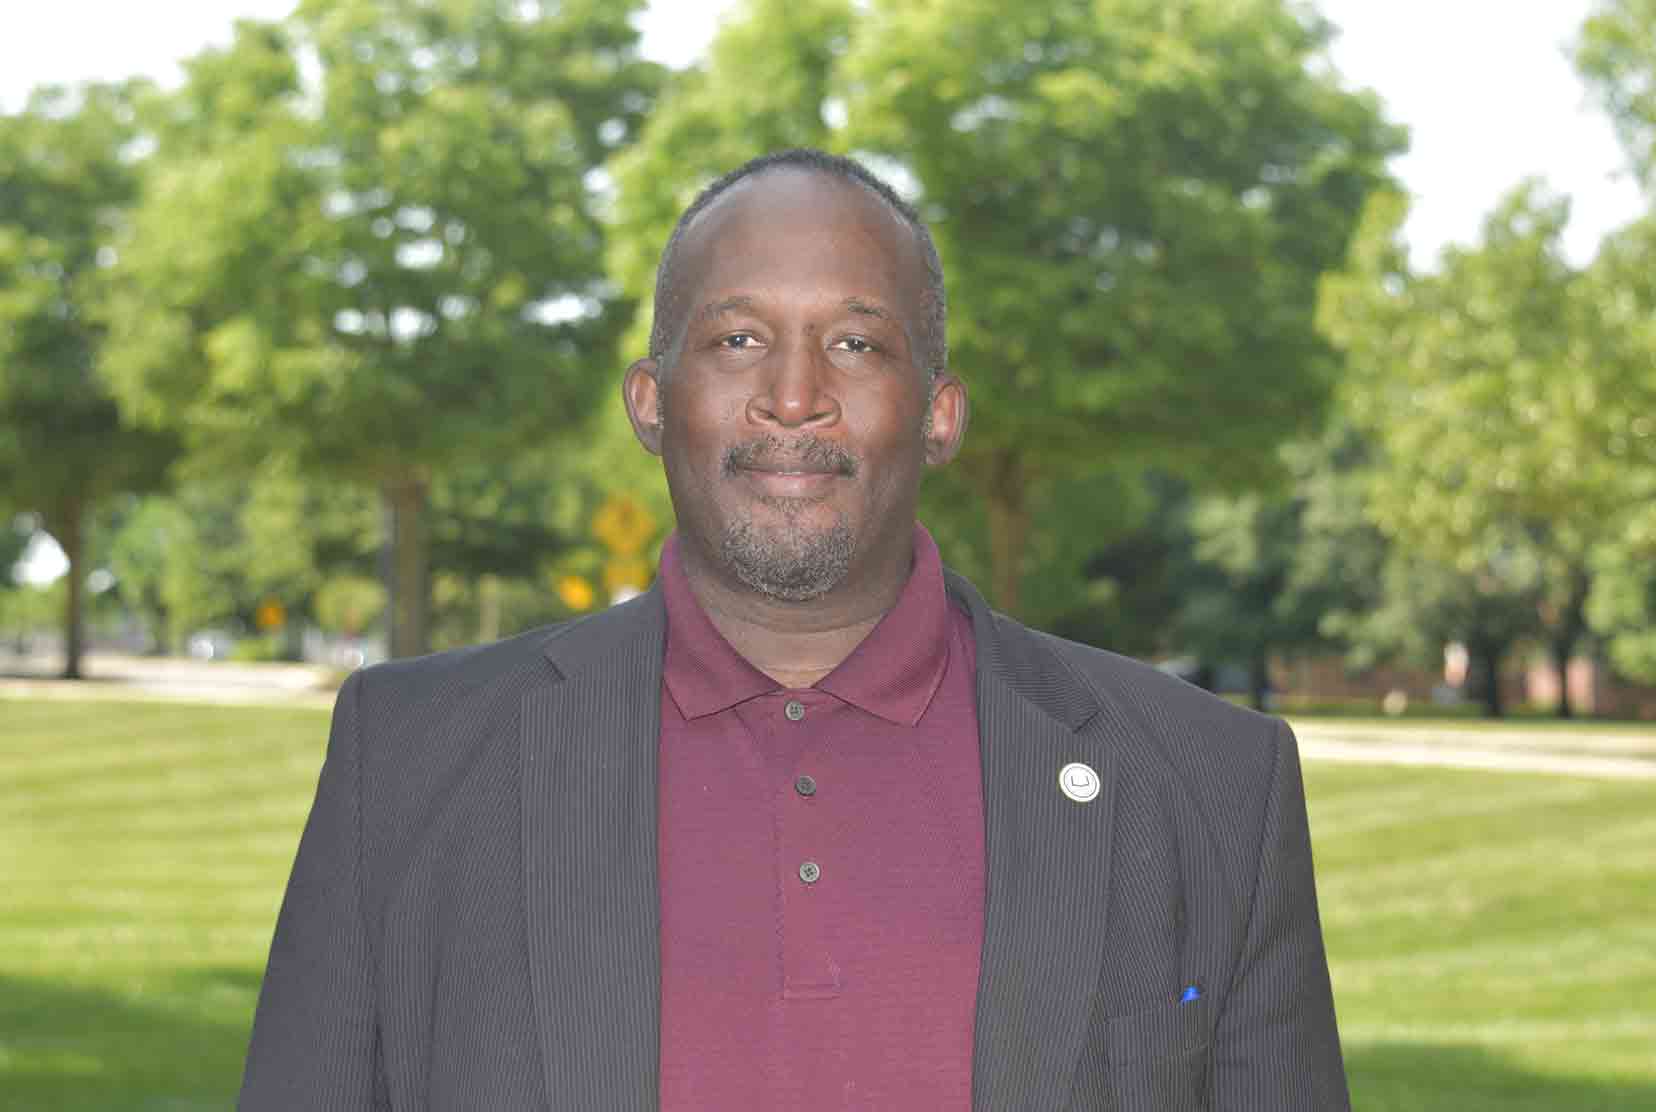 Dr. Charlie Wilson, Associate Dean in the College of Agriculture, Sciences and Technology, has been elected to a five-term on the Smyrna Board of Education.